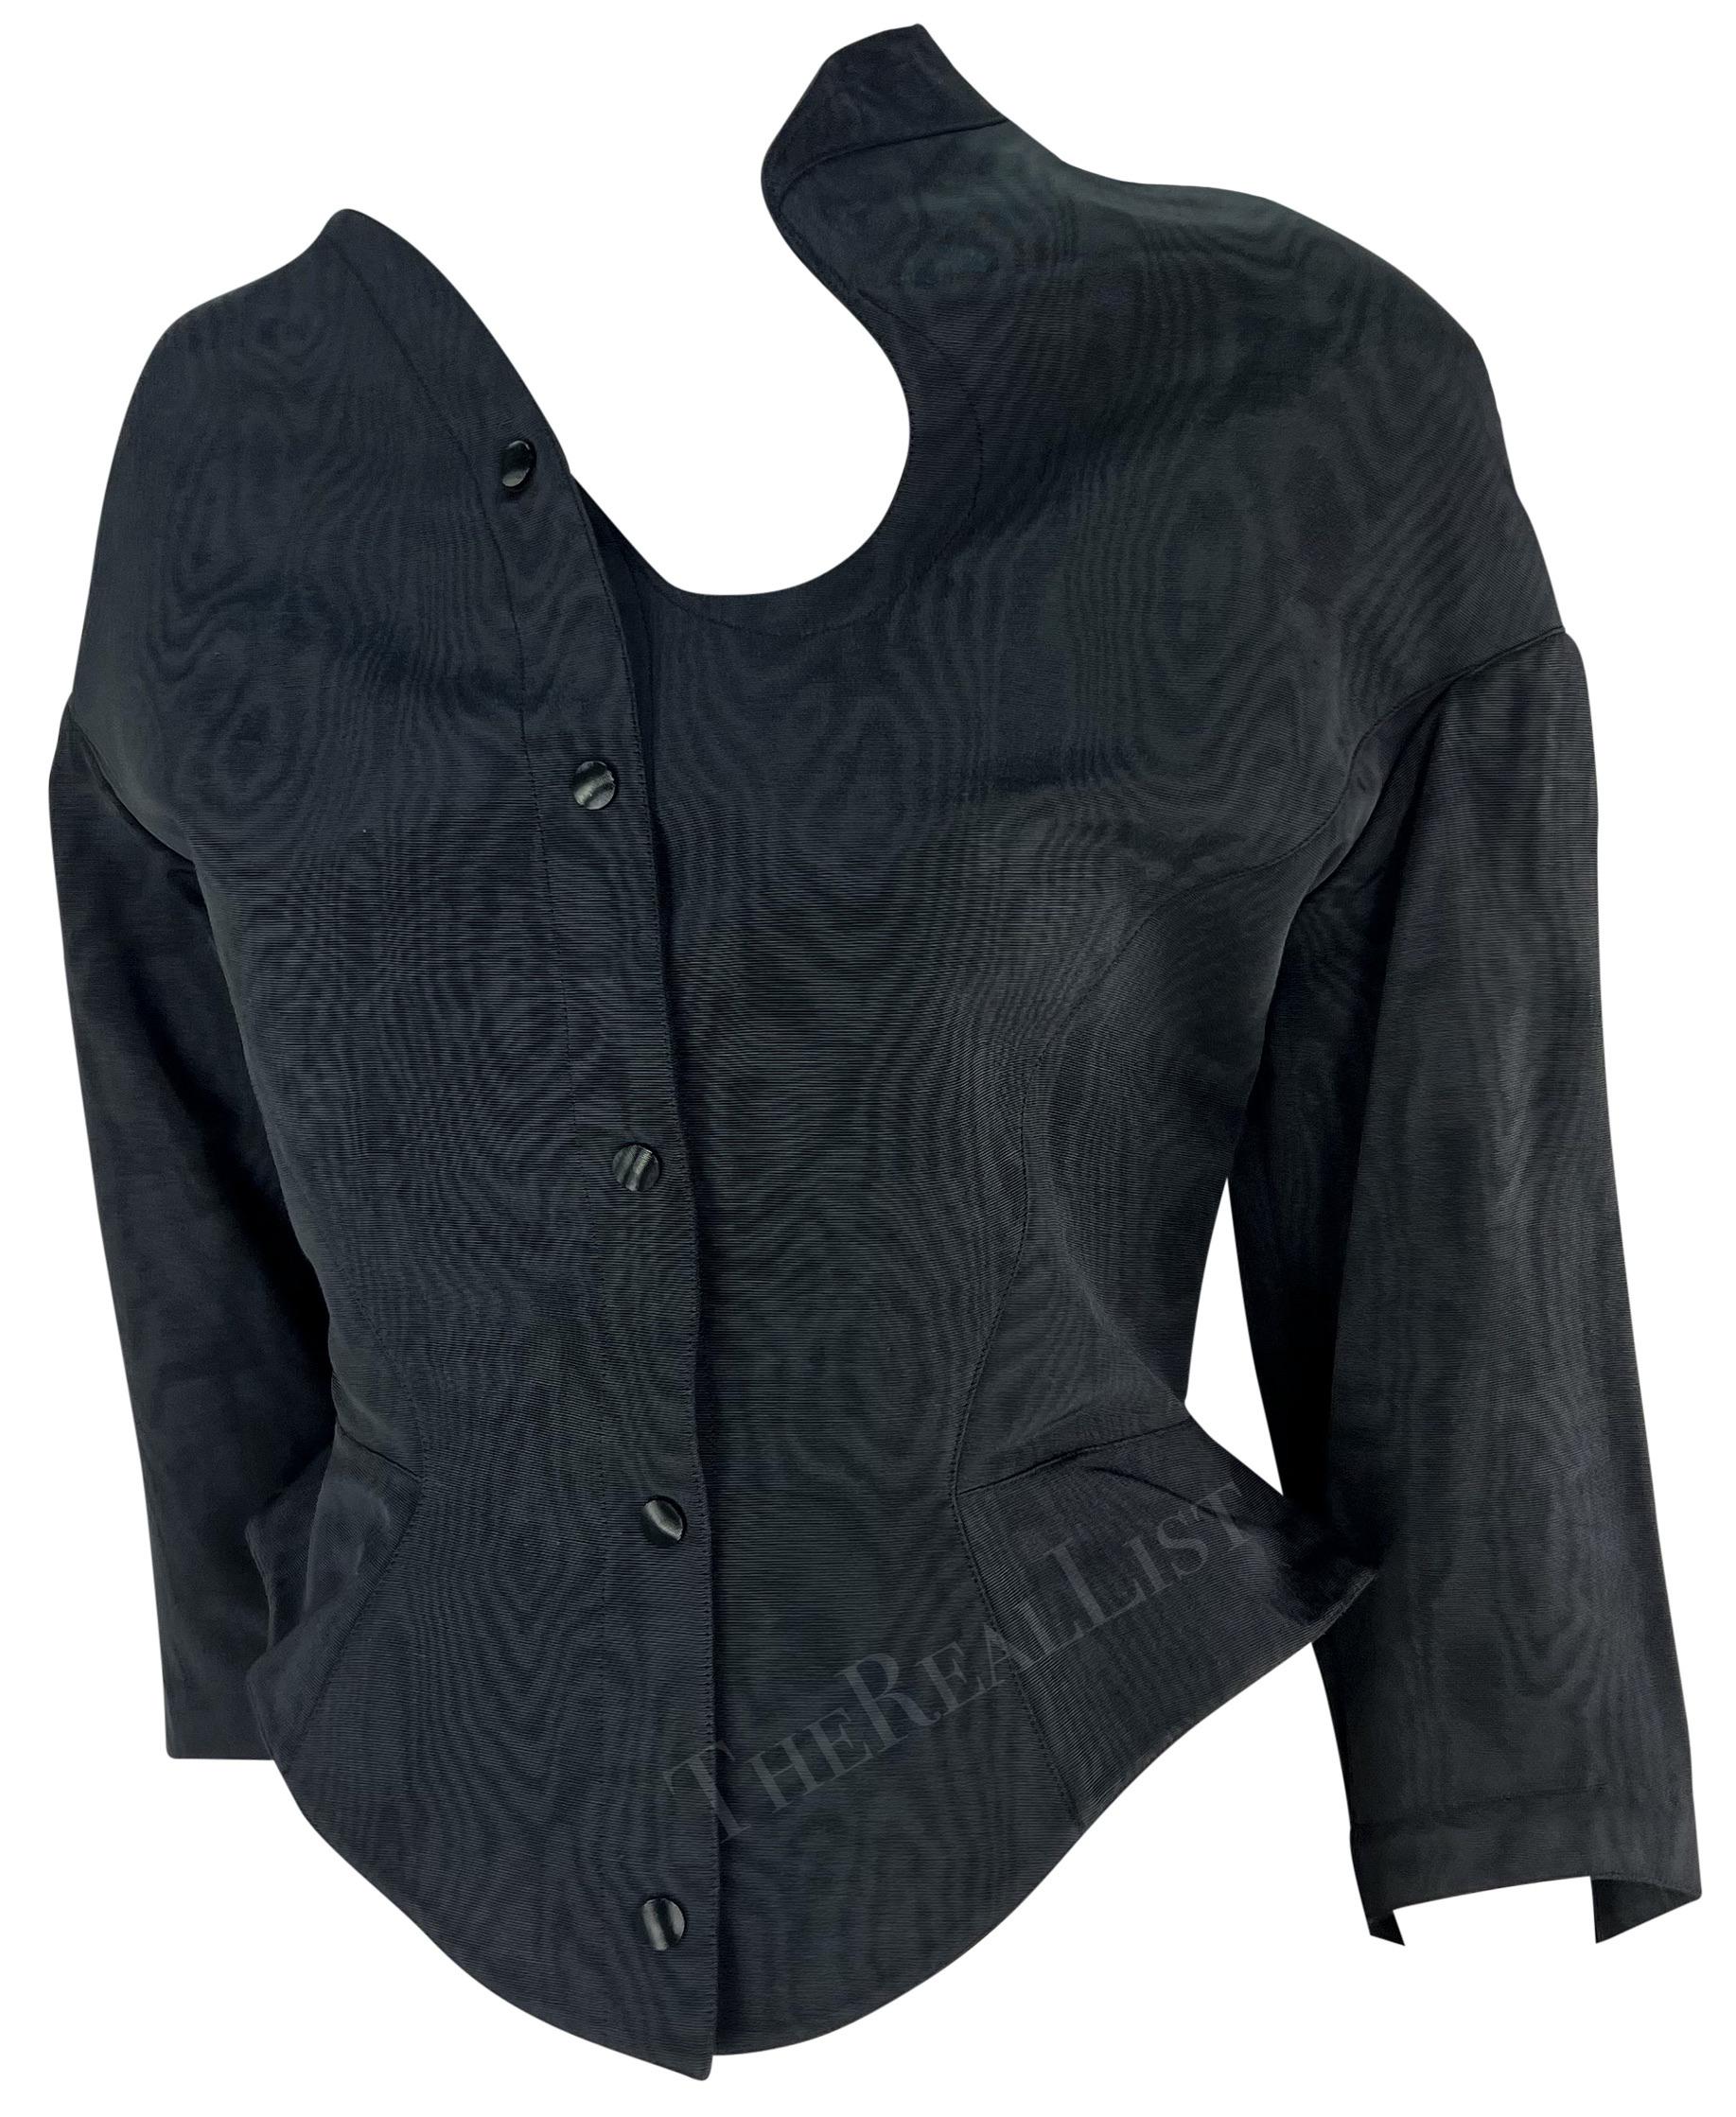 Presenting a fabulous navy blue Thierry Mugler jacket, designed by Manfred Mugler. From the late 1980s/ early 1990s, this asymmetric sculptural jacket is the perfect encapsulation of the dramatic style Mugler is infamous for. The jacket features a